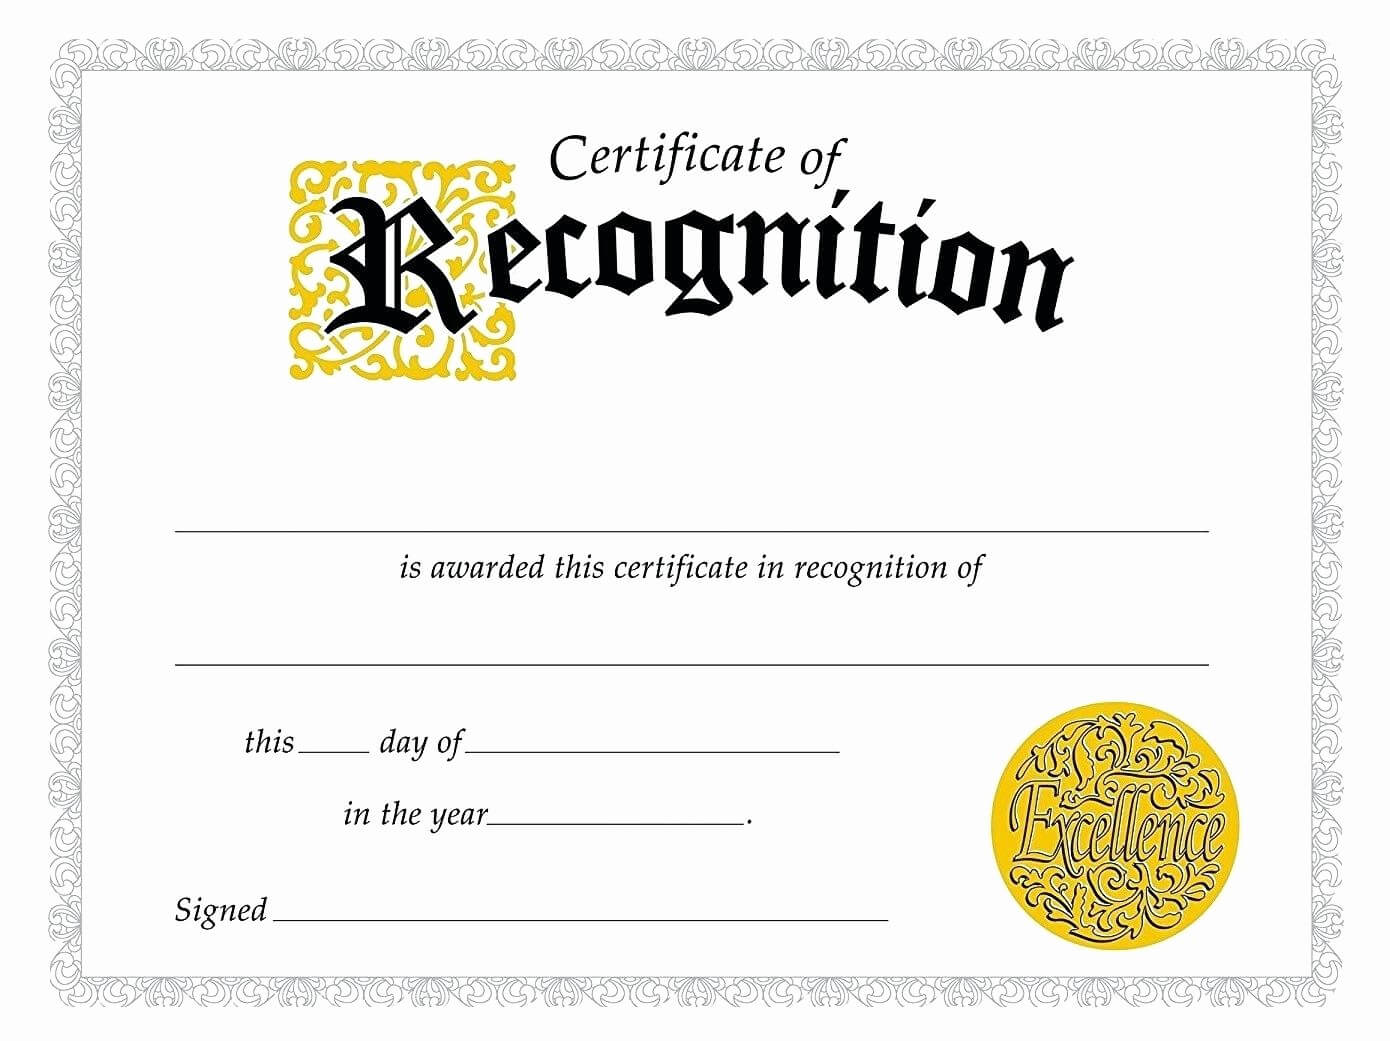 025 Employee Recognition Certificates Templates Free Unique Throughout Employee Recognition Certificates Templates Free